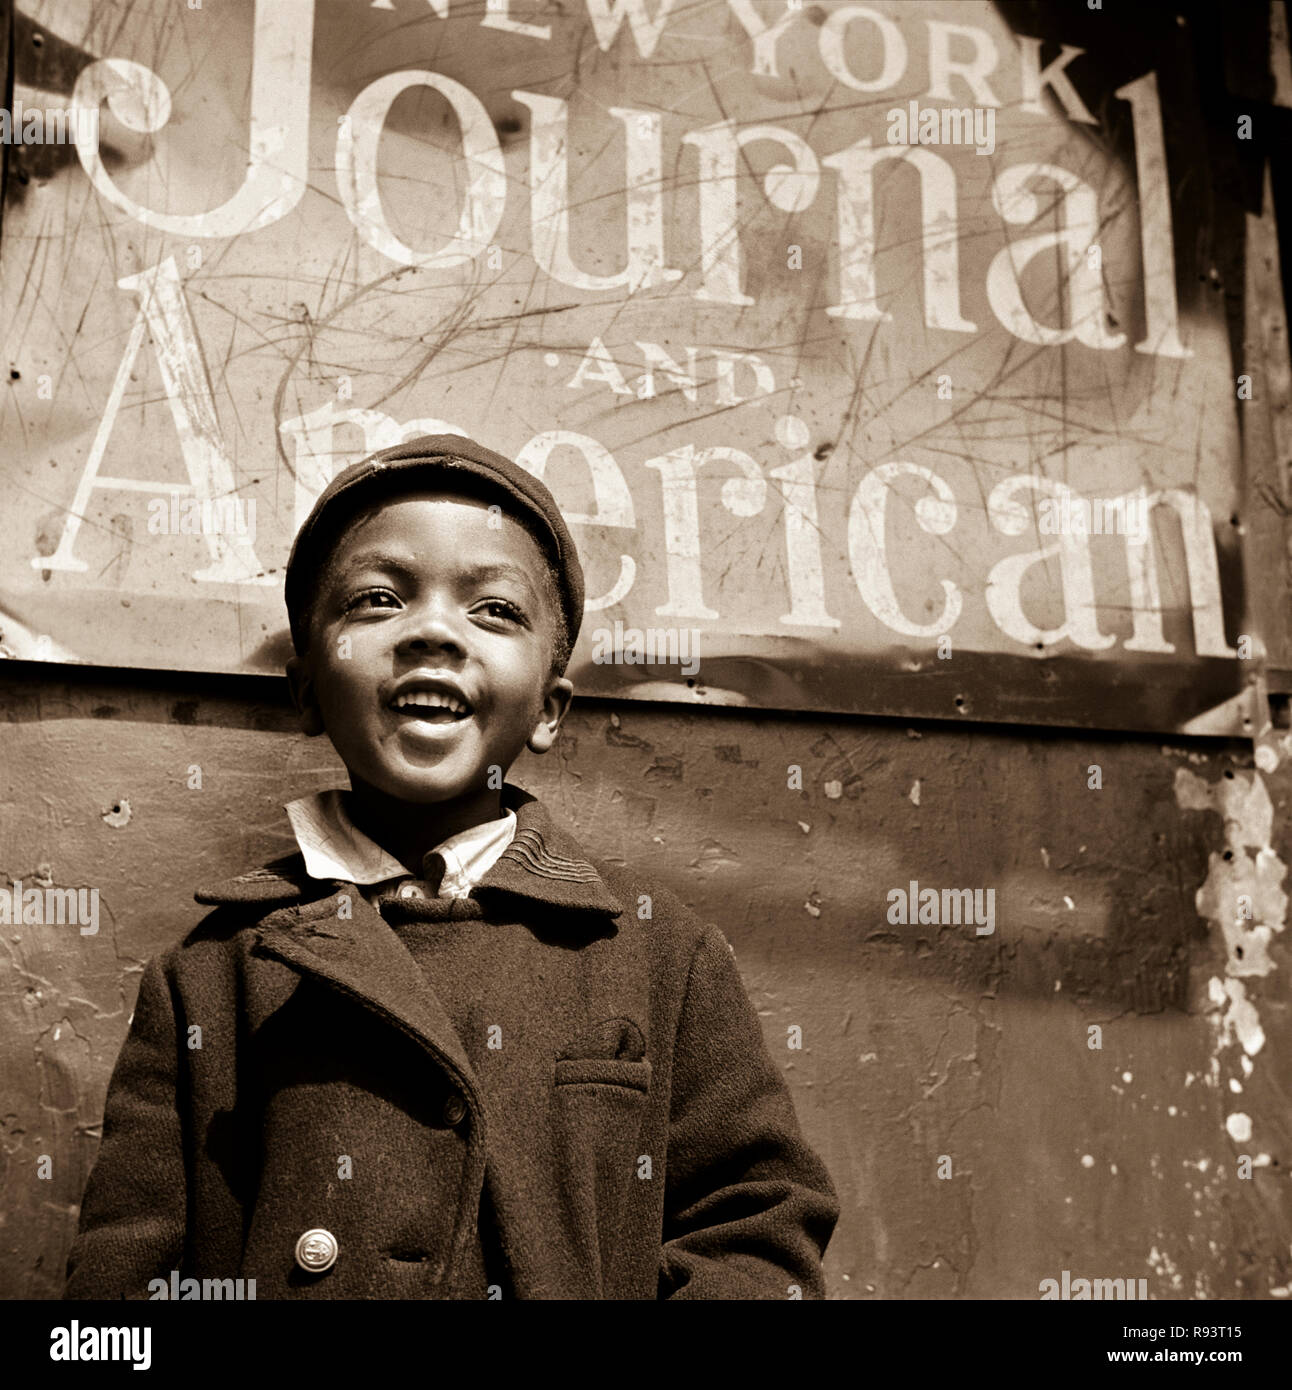 Harlem newsboy - New York, NY. Circa June 1943. Photograph by Gordon Parks/FSA  This archival print is available in the following sizes:  8' x 10'   $15.95 w/ FREE SHIPPING 11' x 14' $23.95 w/ FREE SHIPPING 16' x 20' $59.95 w/ FREE SHIPPING 20' x 24' $99.95 w/ FREE SHIPPING  * The American Photoarchive watermark will not appear on your print. Stock Photo